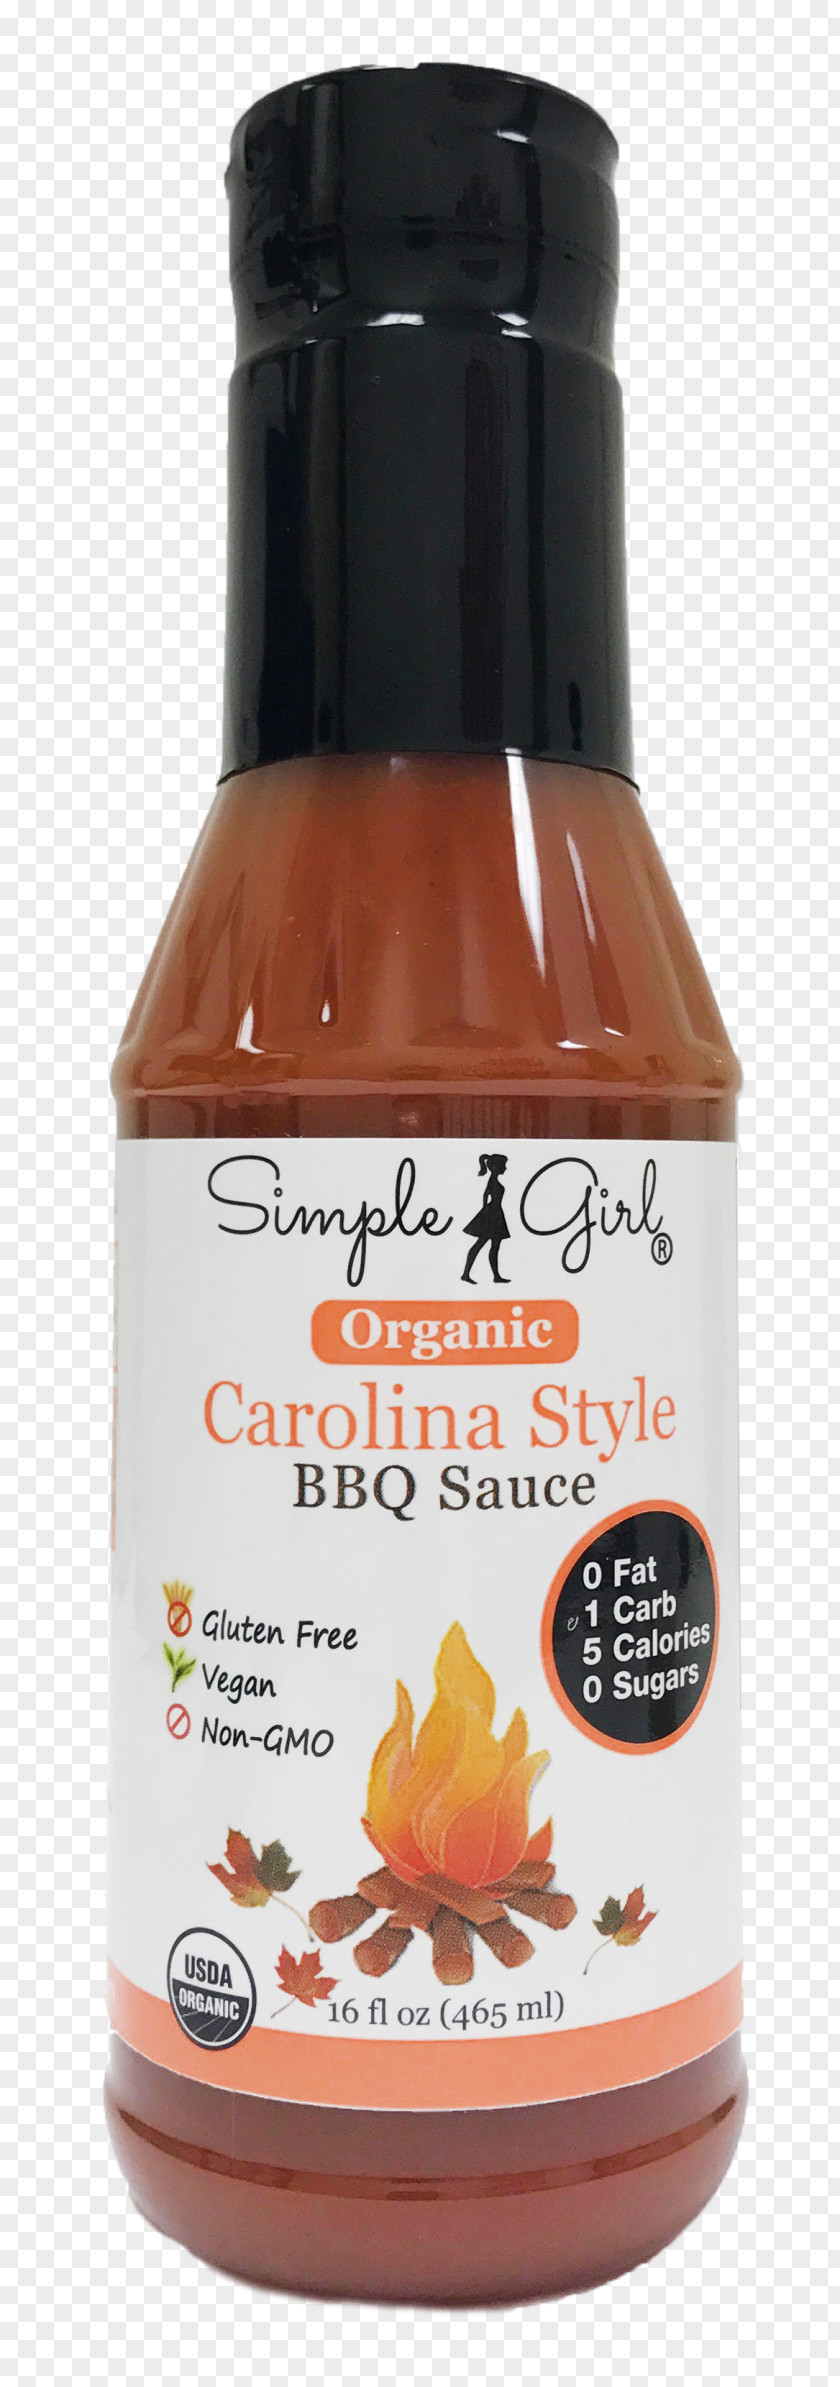 Sweet Chili Sauce Barbecue Gluten-free Diet Hot Low-carbohydrate PNG